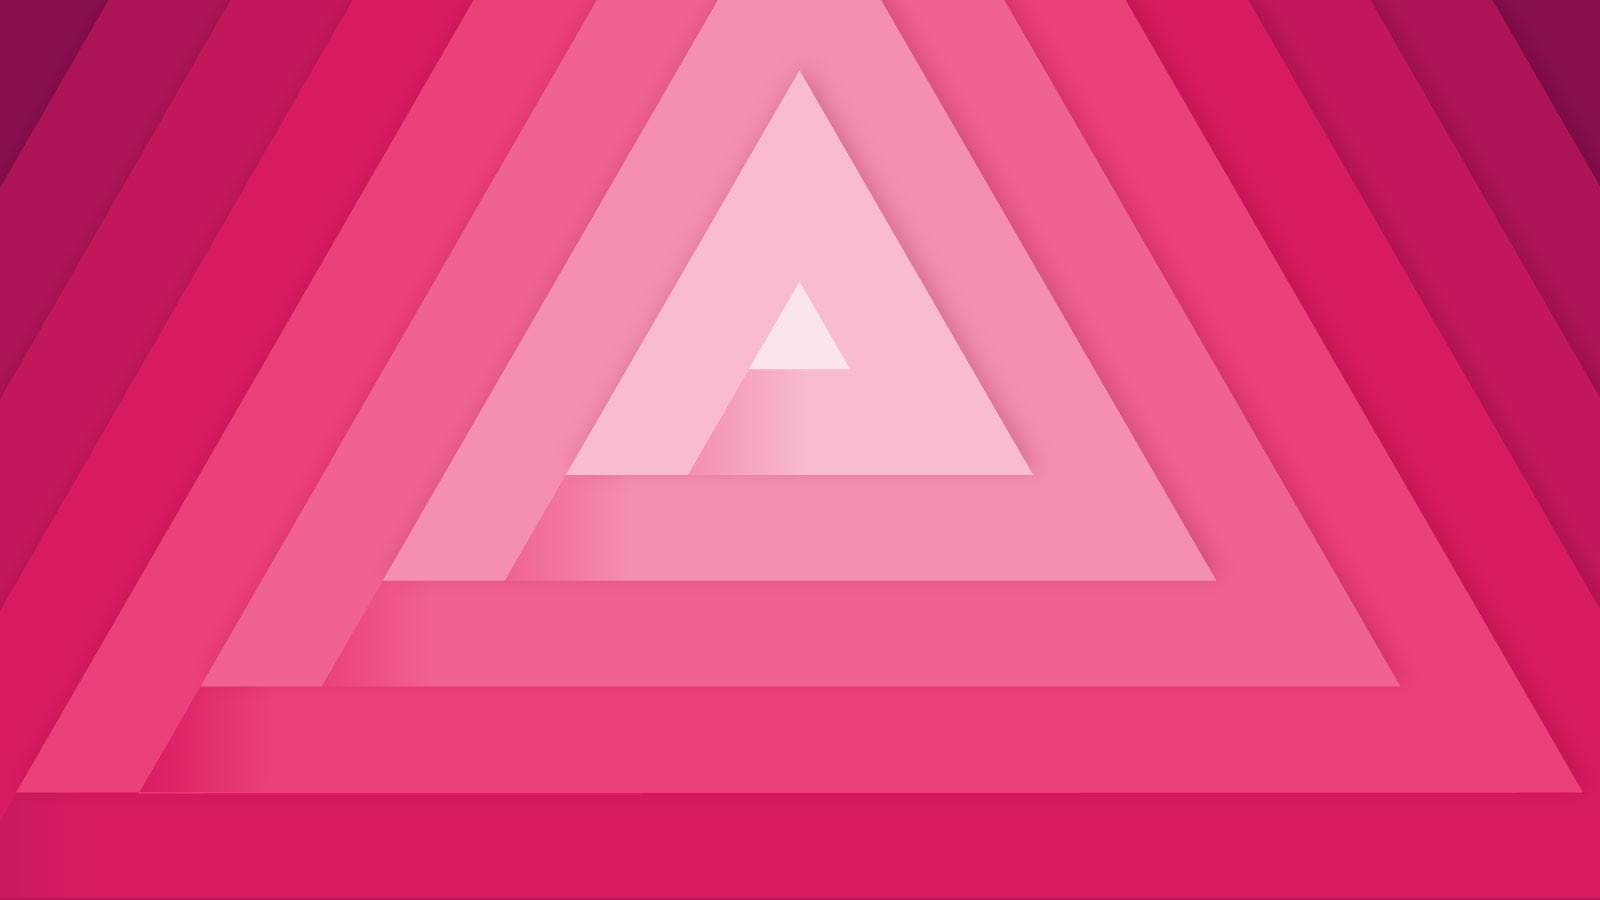 material style, backgrounds, pink color, shape, no people, triangle shape